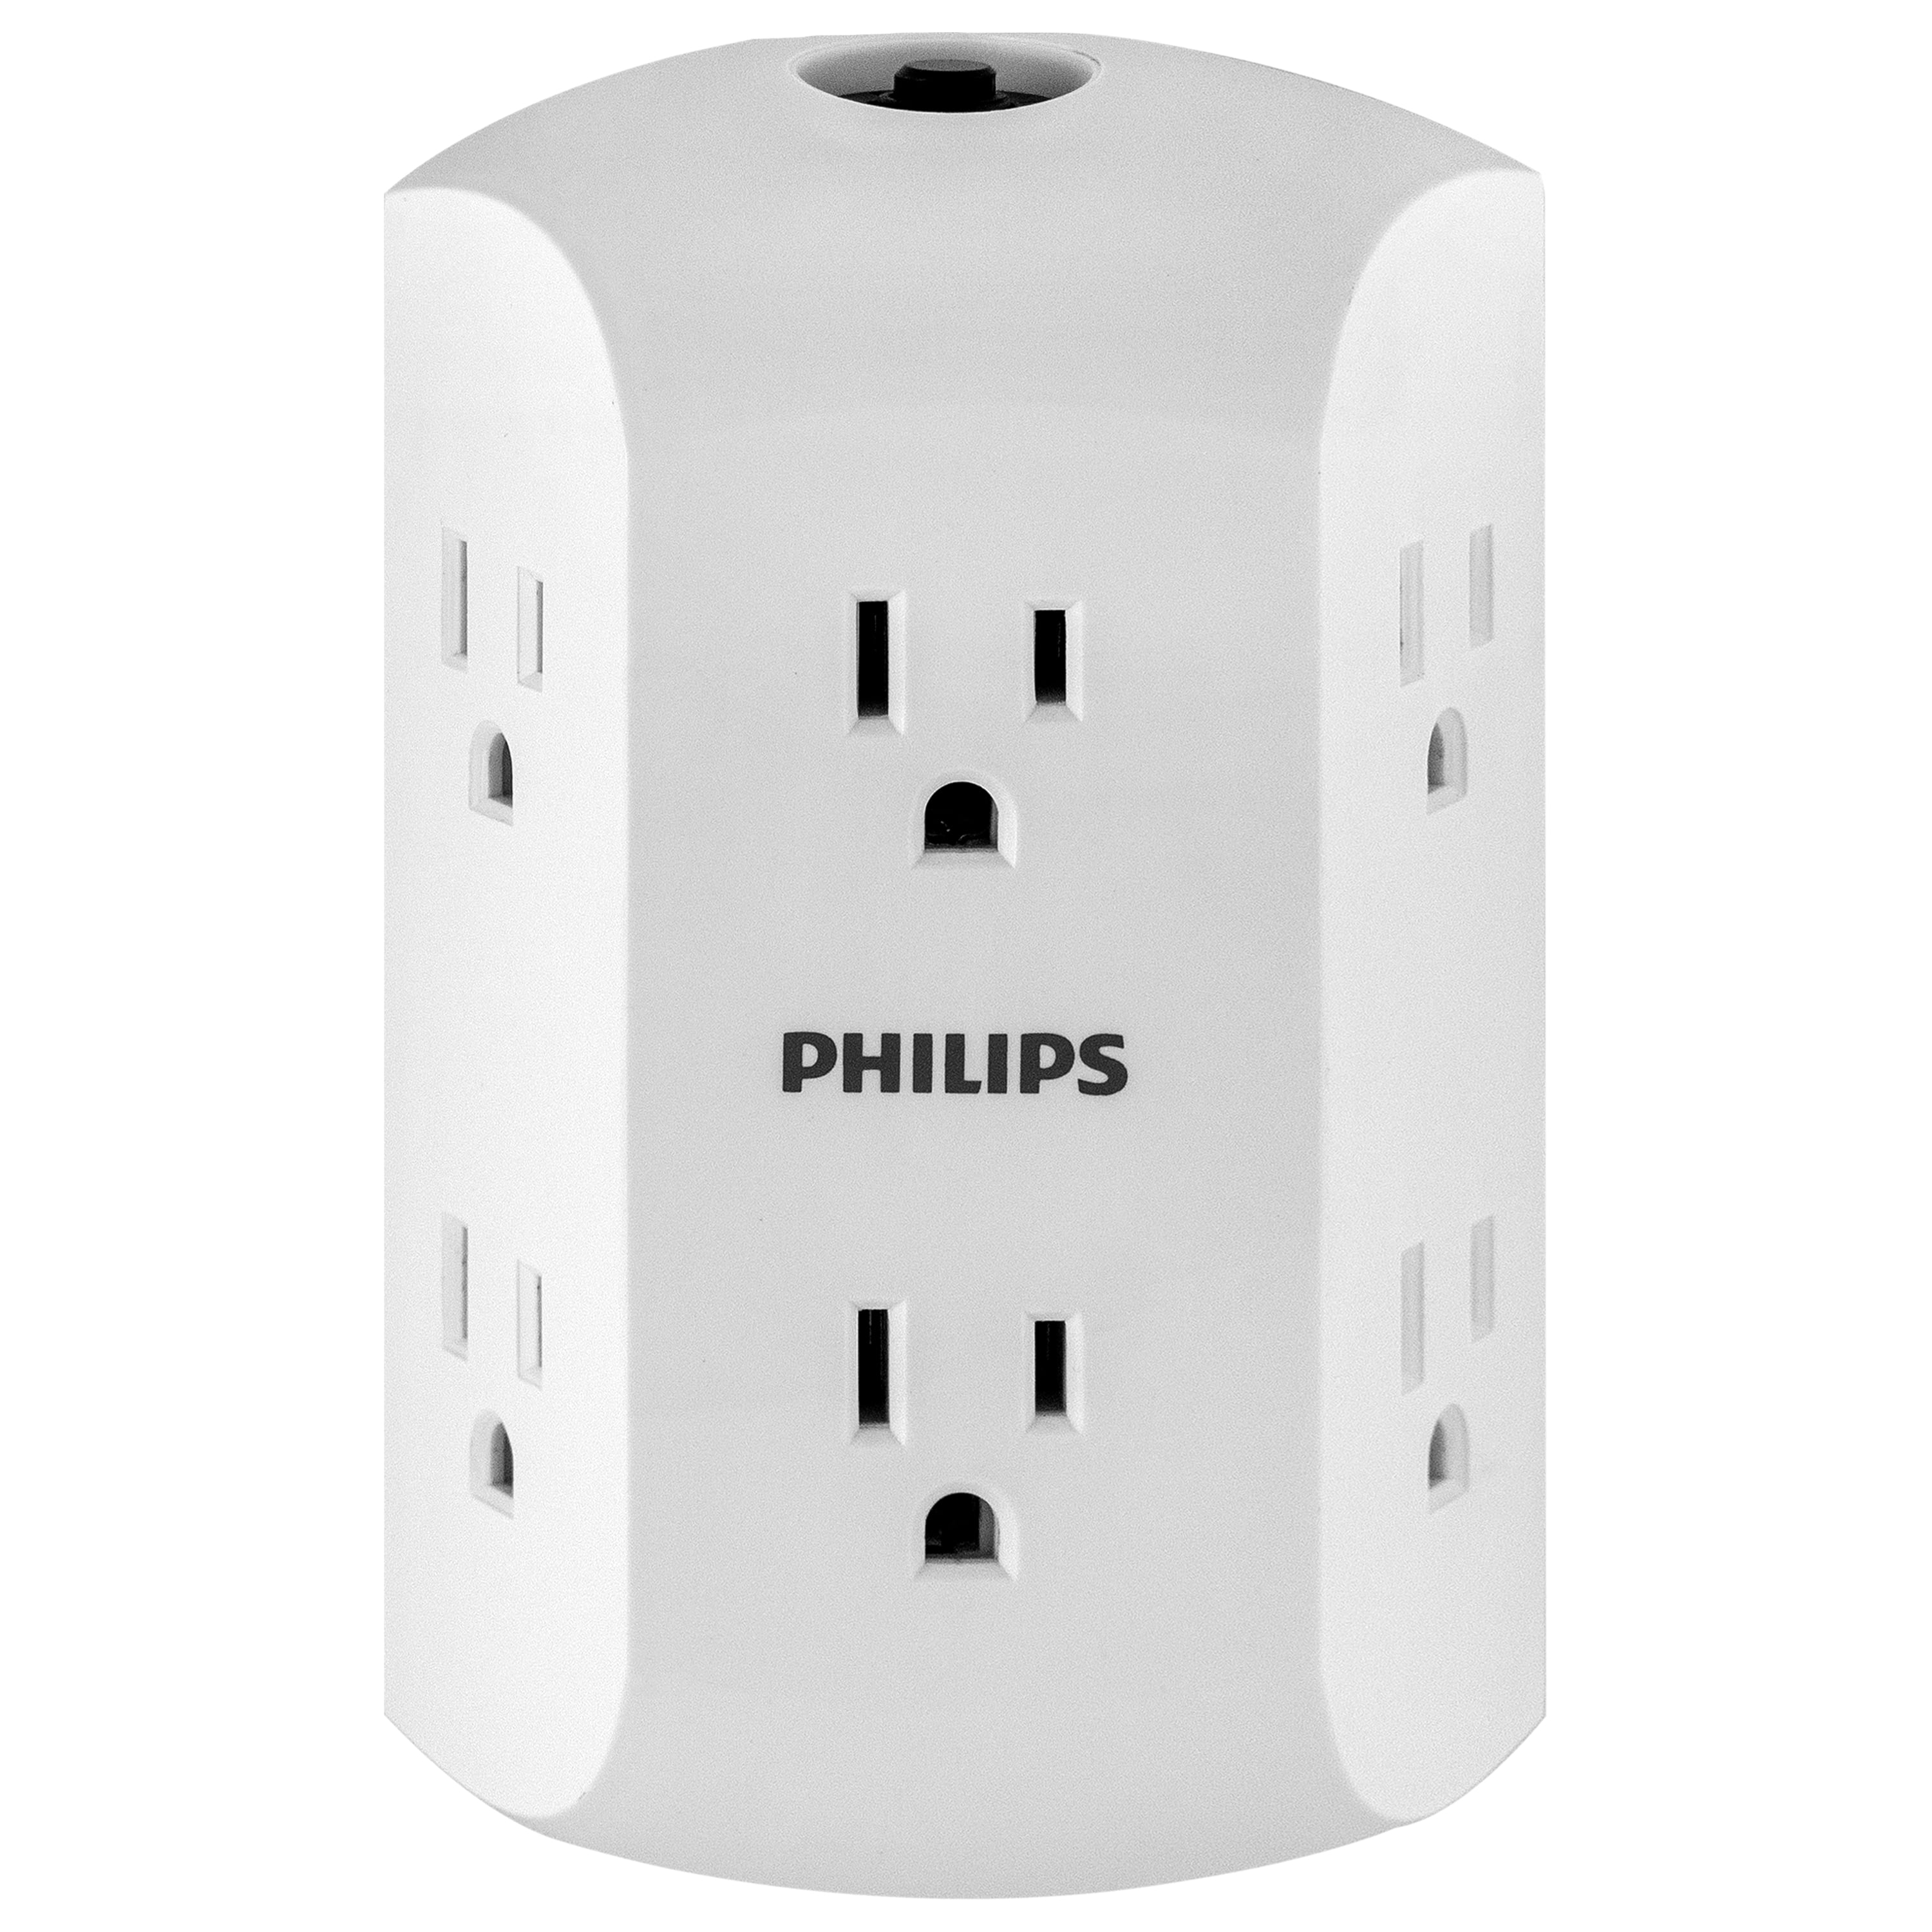 Philips 6 Outlet Wall Charger, Resettable Circuit Breaker, White